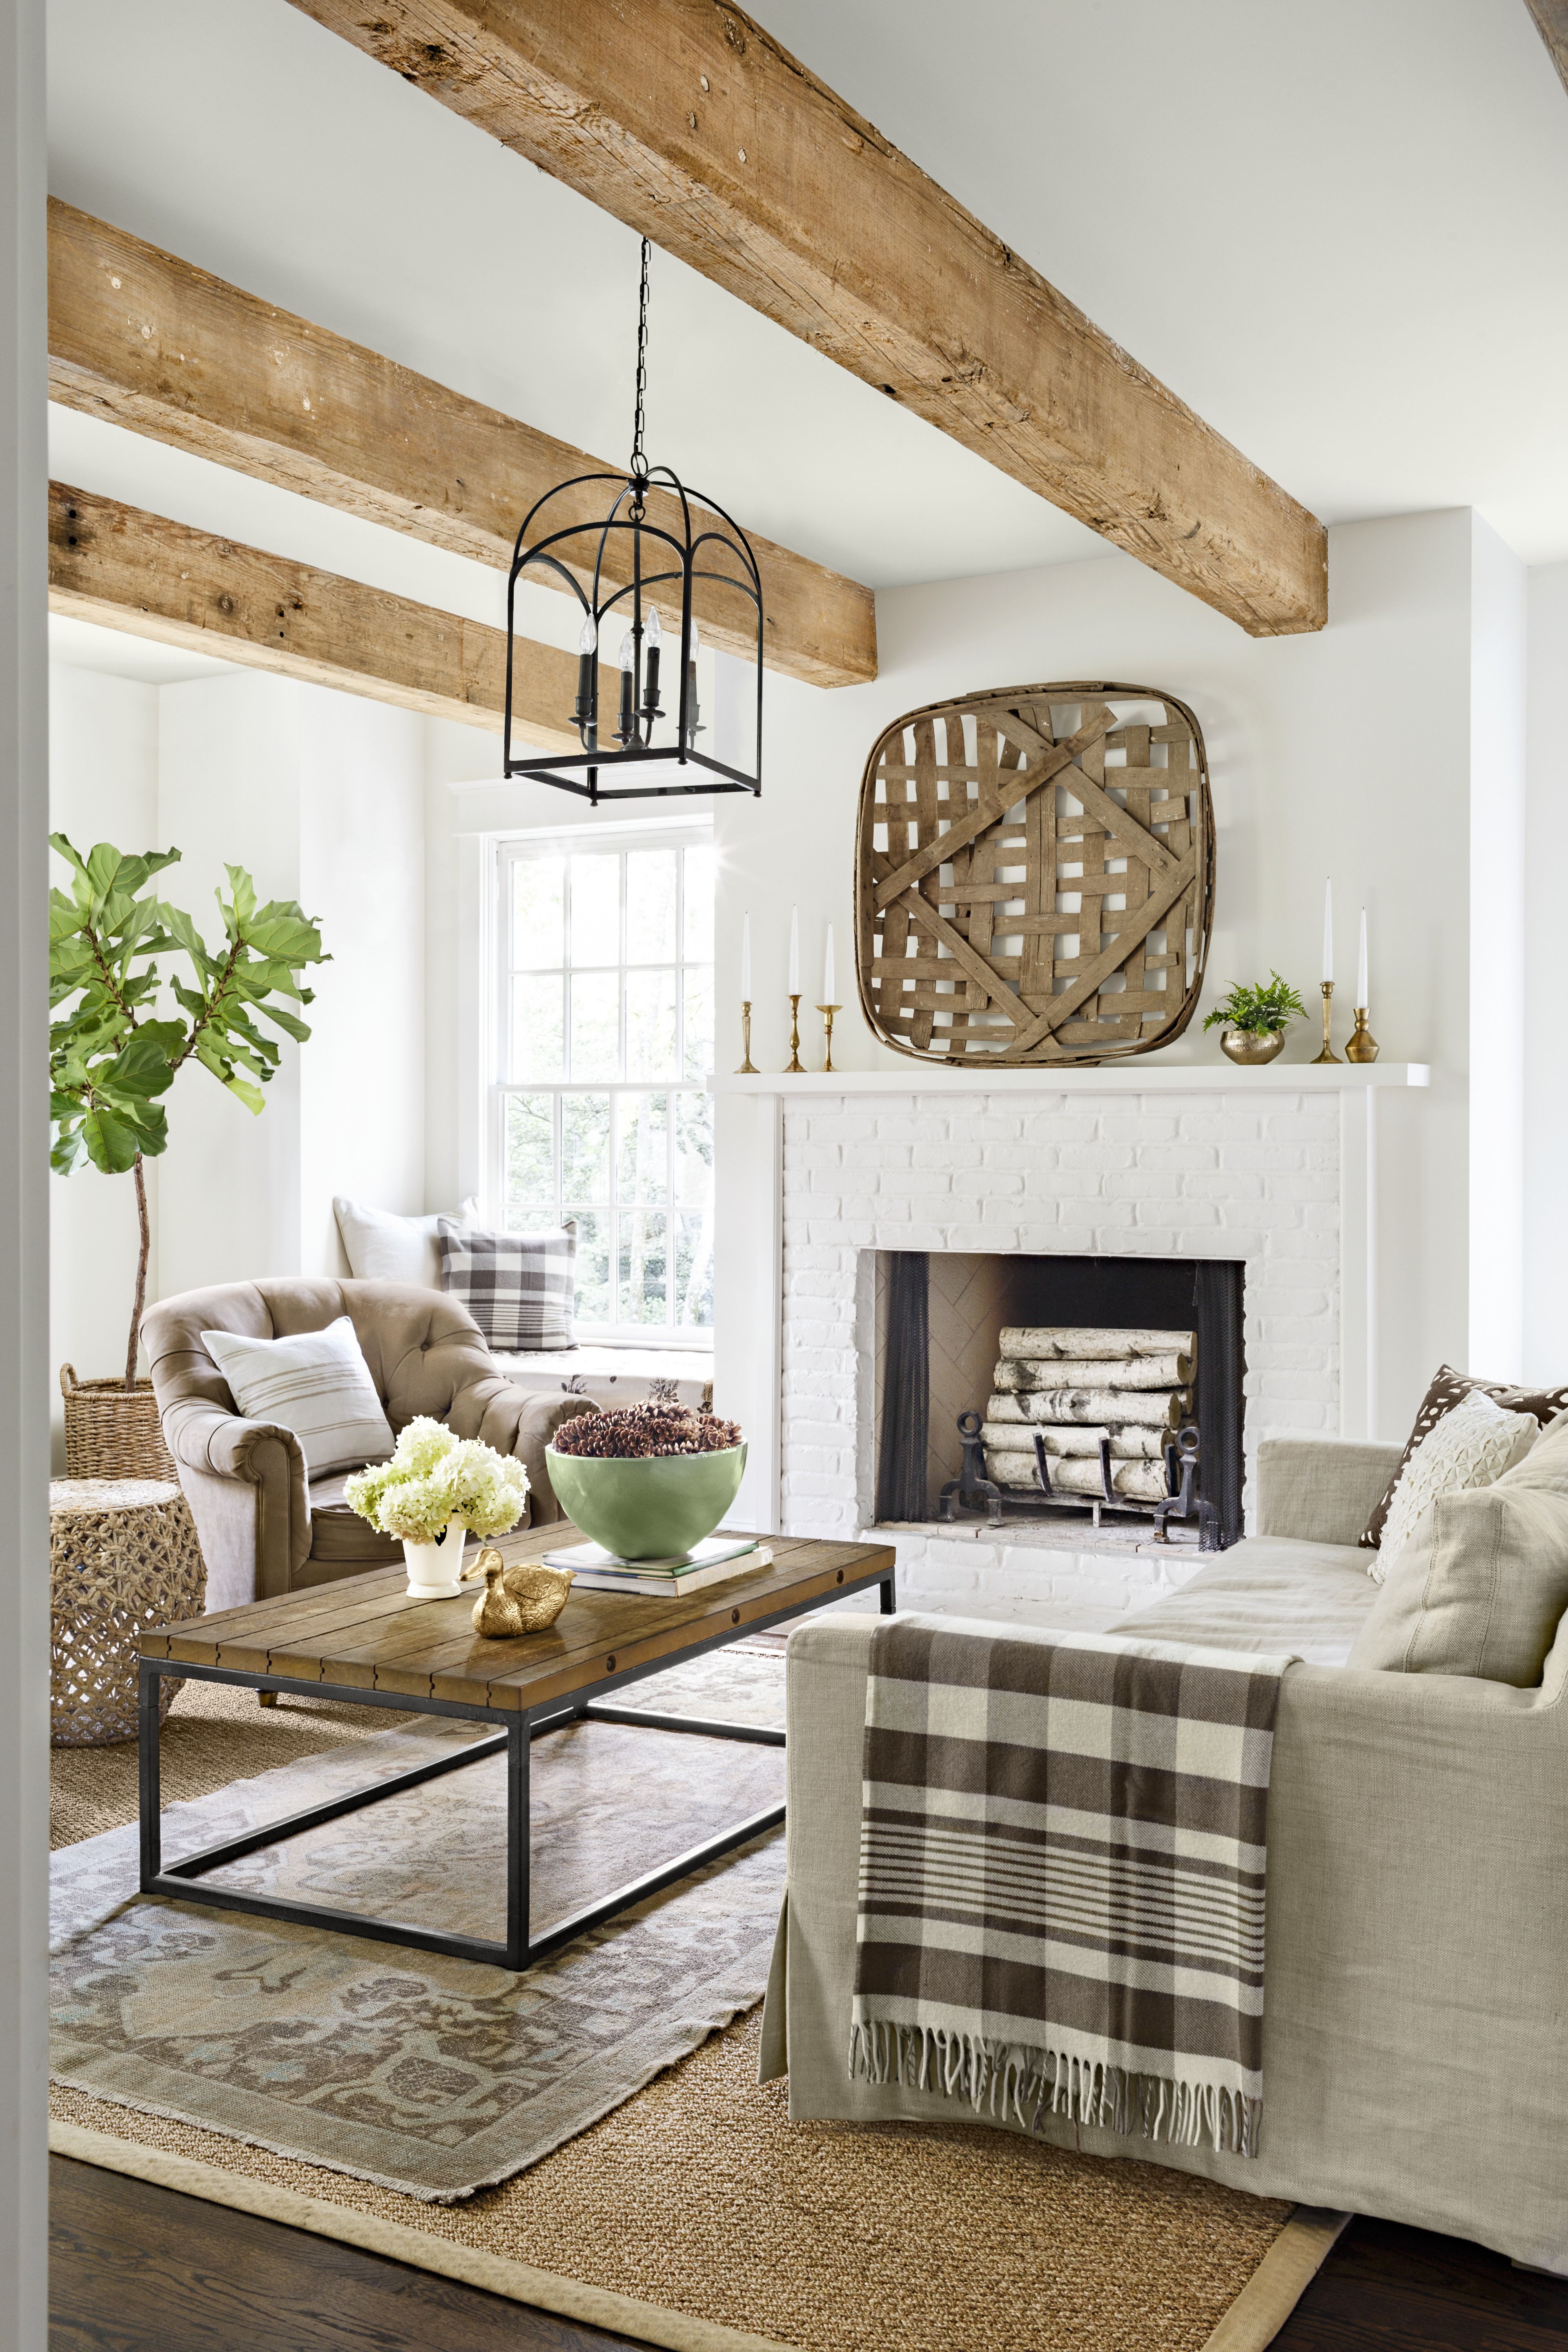 Modern Rustic Living Room Decor, Pics Of Rustic Country Living Rooms